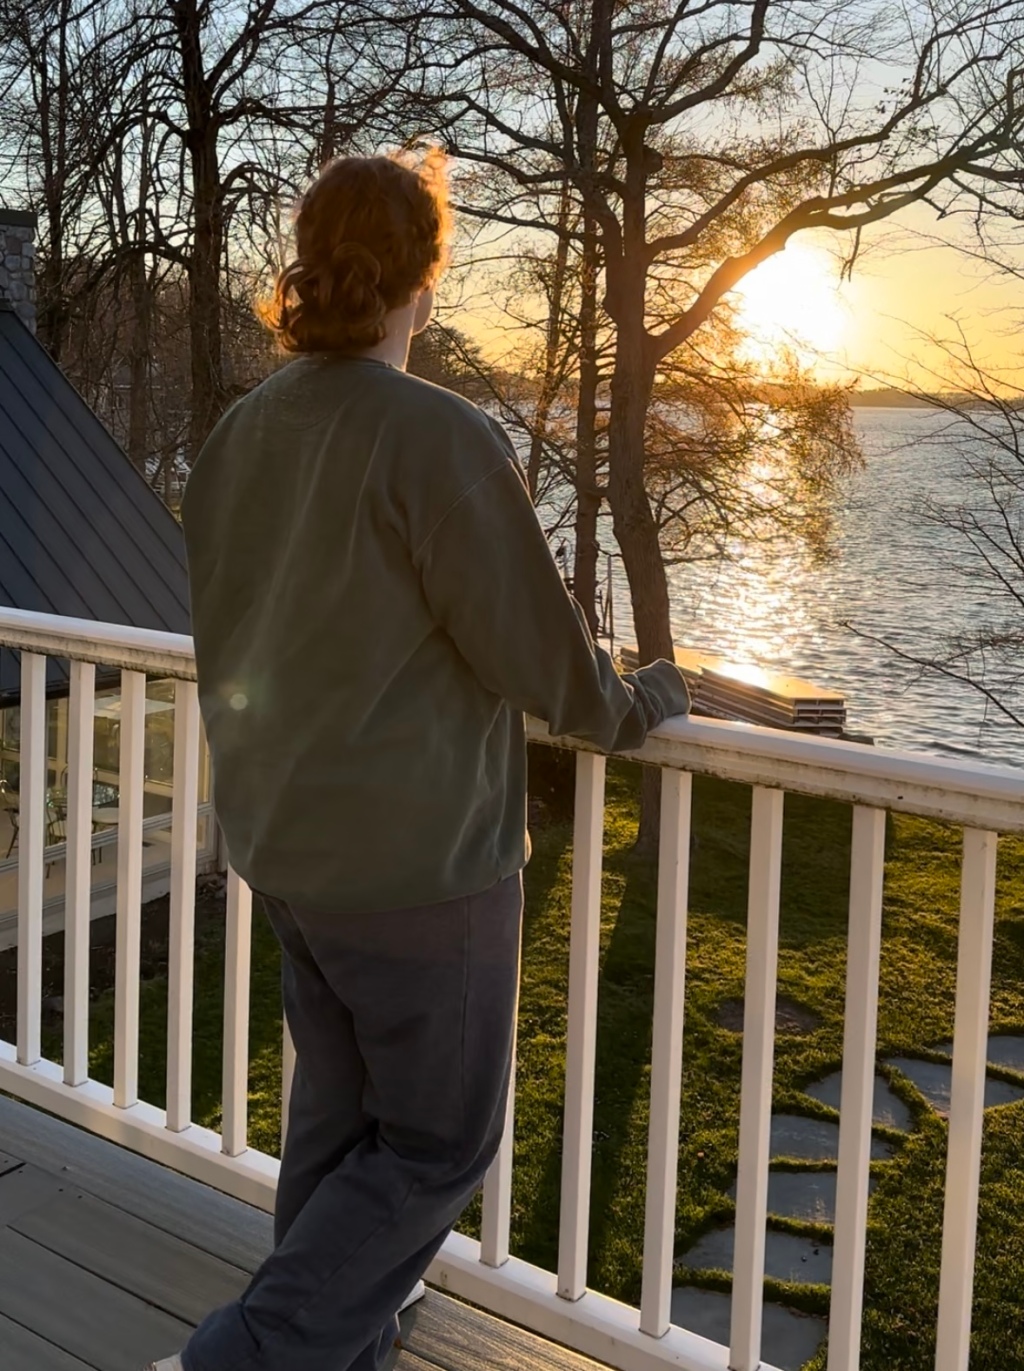 woman stands on a balcony and looks out at the sunset over a lake